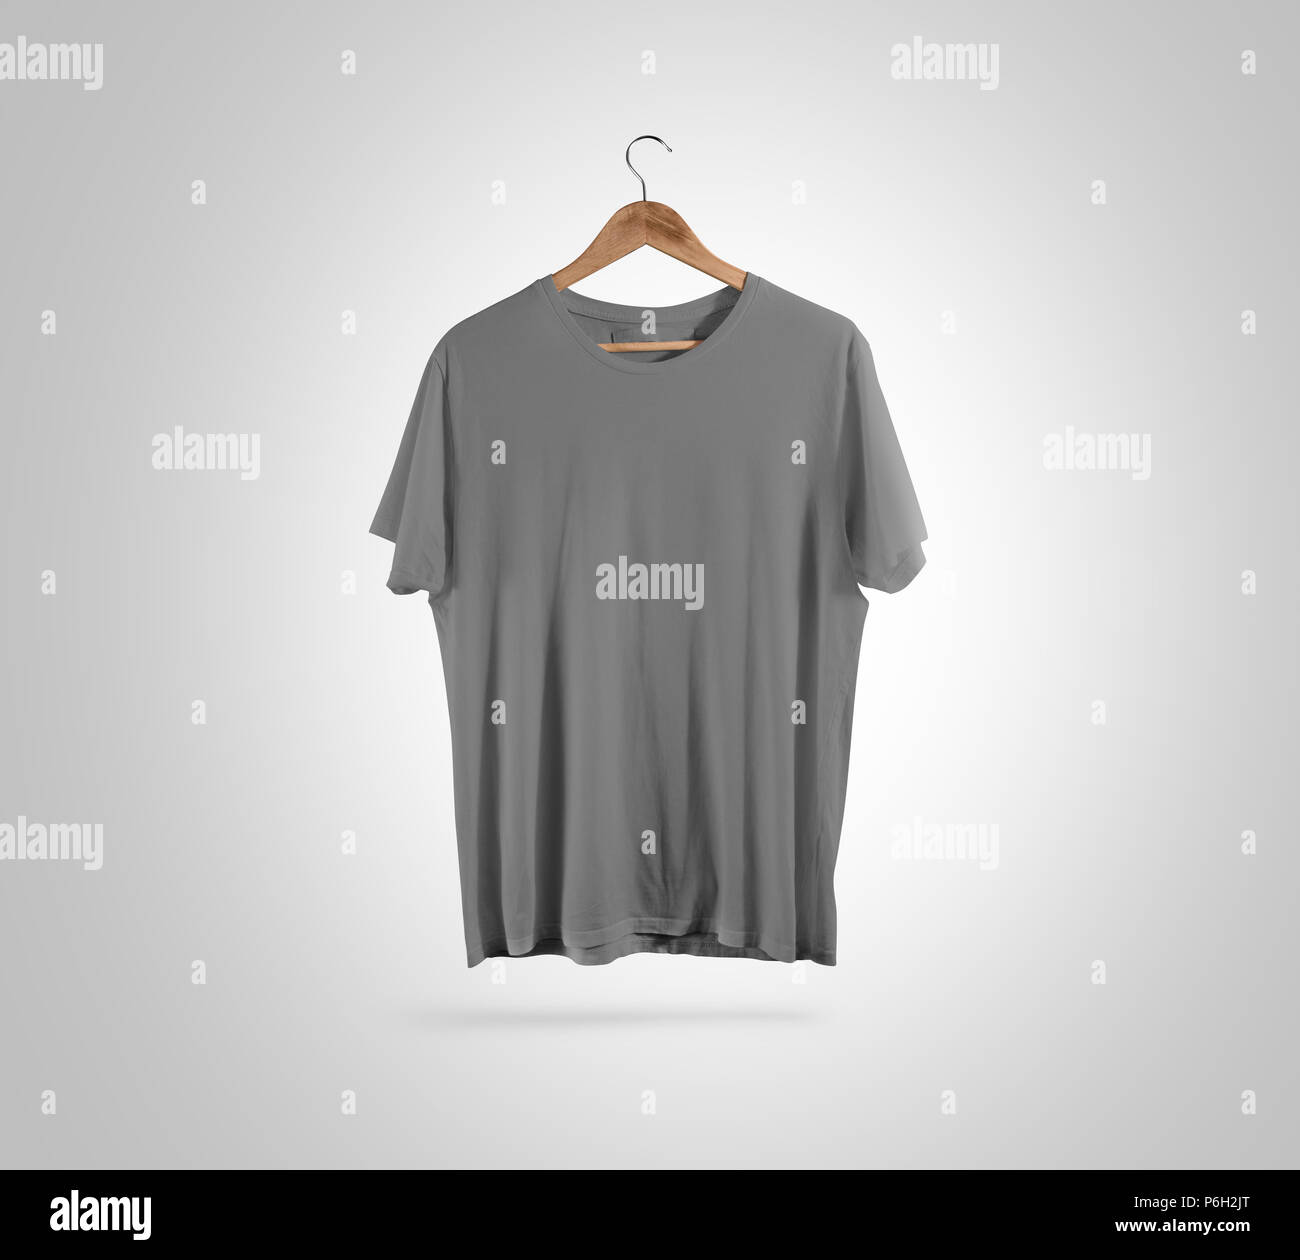 grey t shirt side view